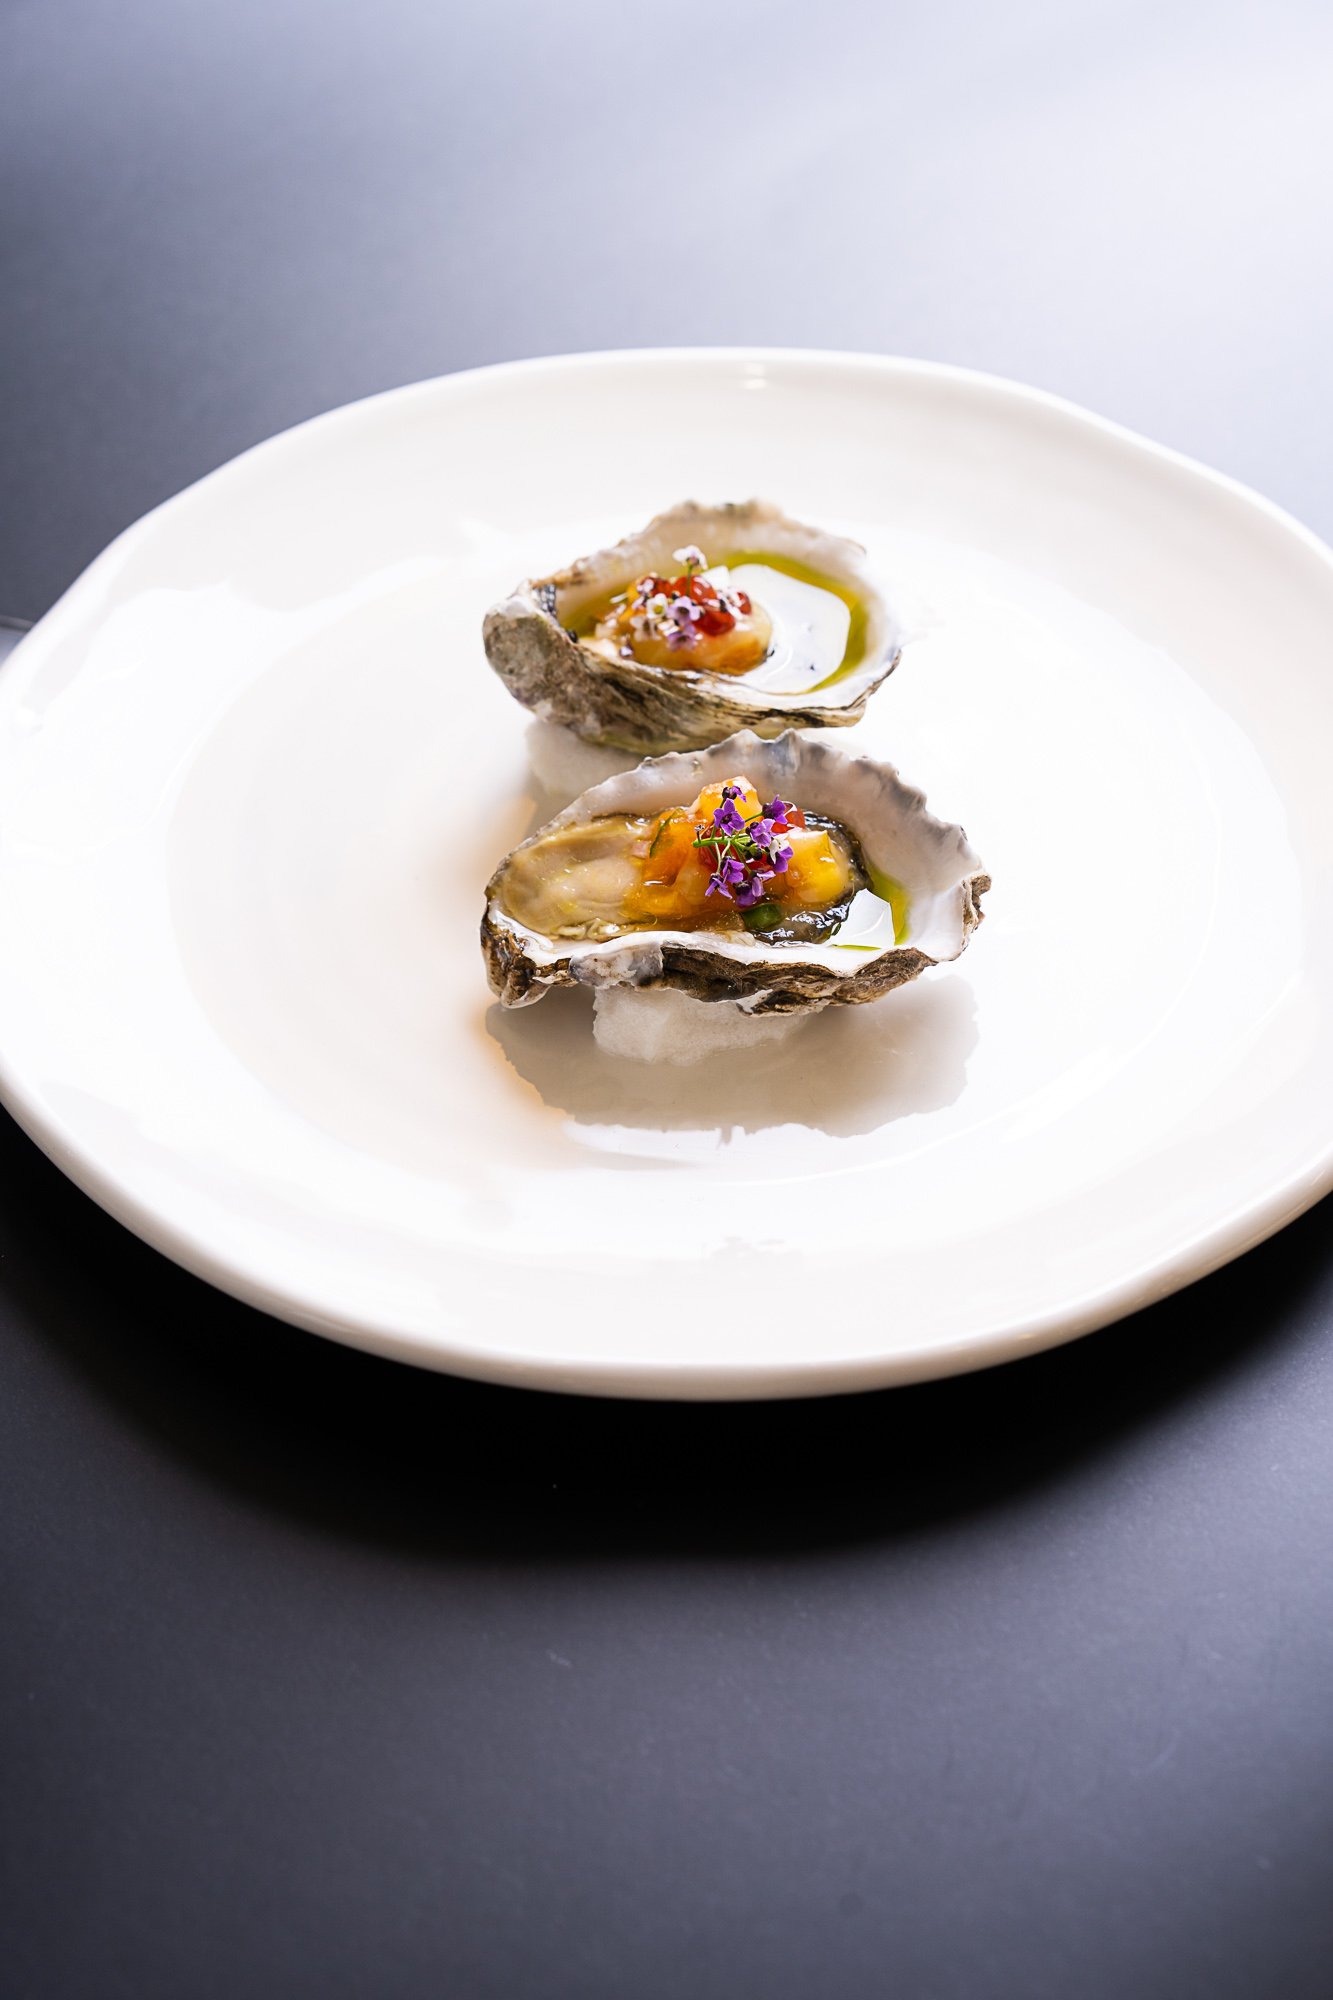 Ostrica con mela - oysters with persimmon, chili and avruga caviar, presentation at Little Black Pig & Sons.jpg